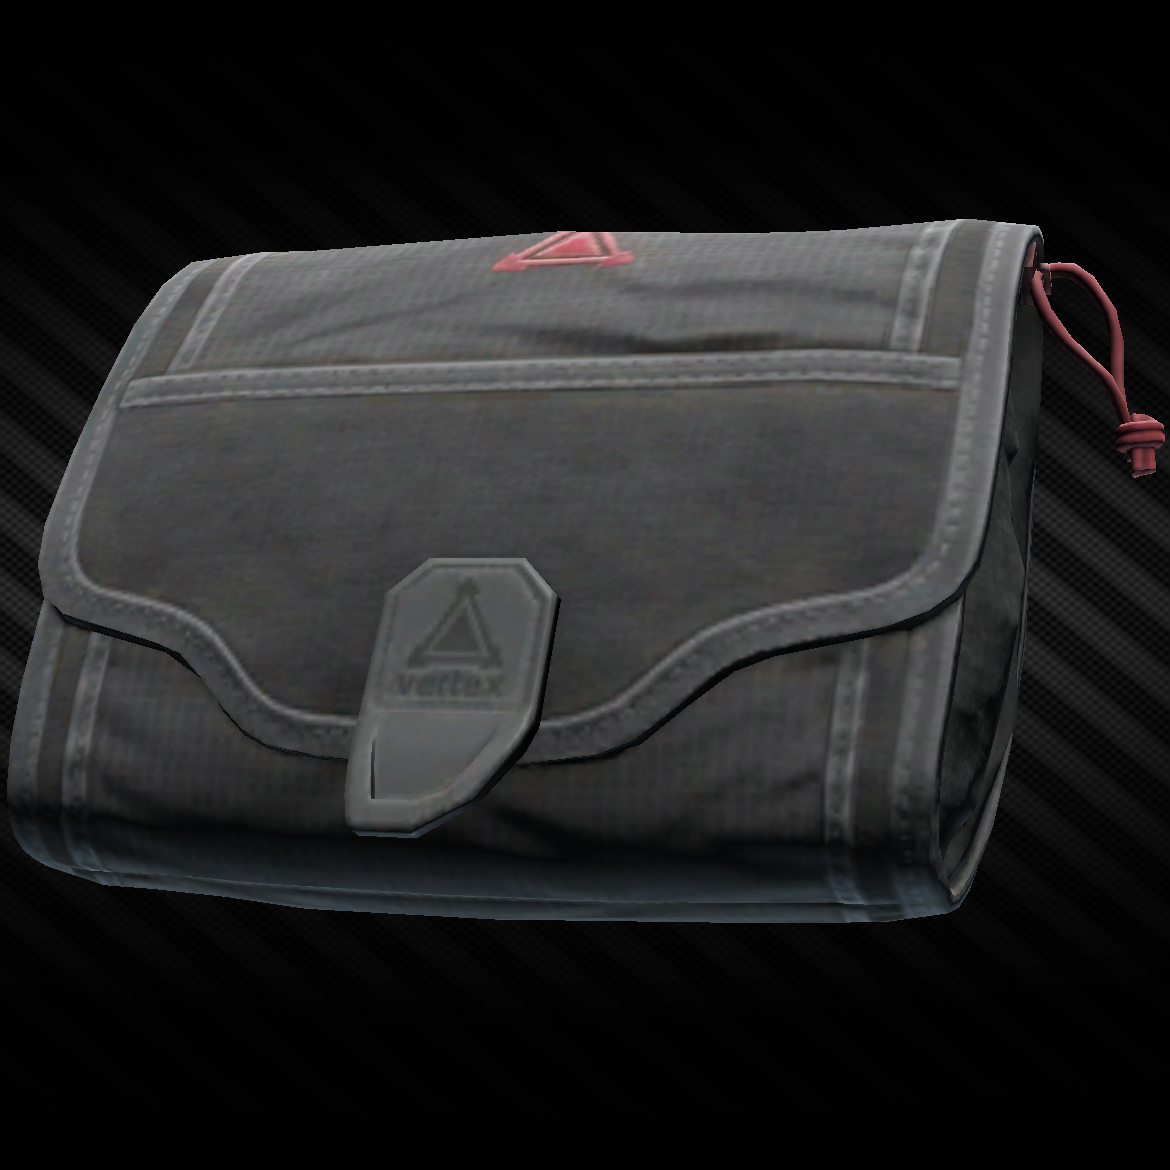 Dreigend snijden fragment S I C C organizational pouch - The Official Escape from Tarkov Wiki